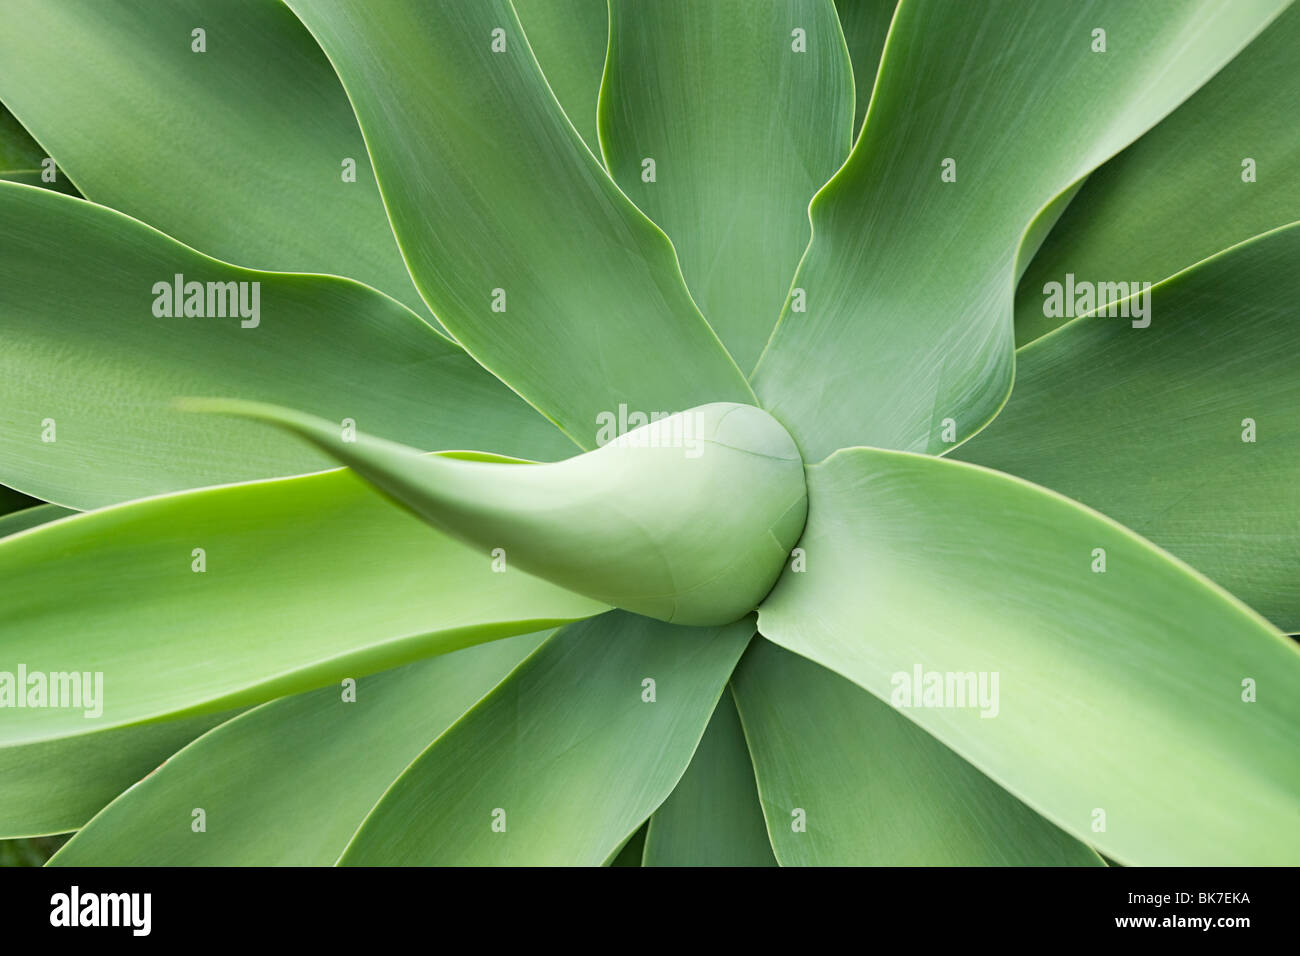 Auckland, agave, century plant, close-up Stock Photo